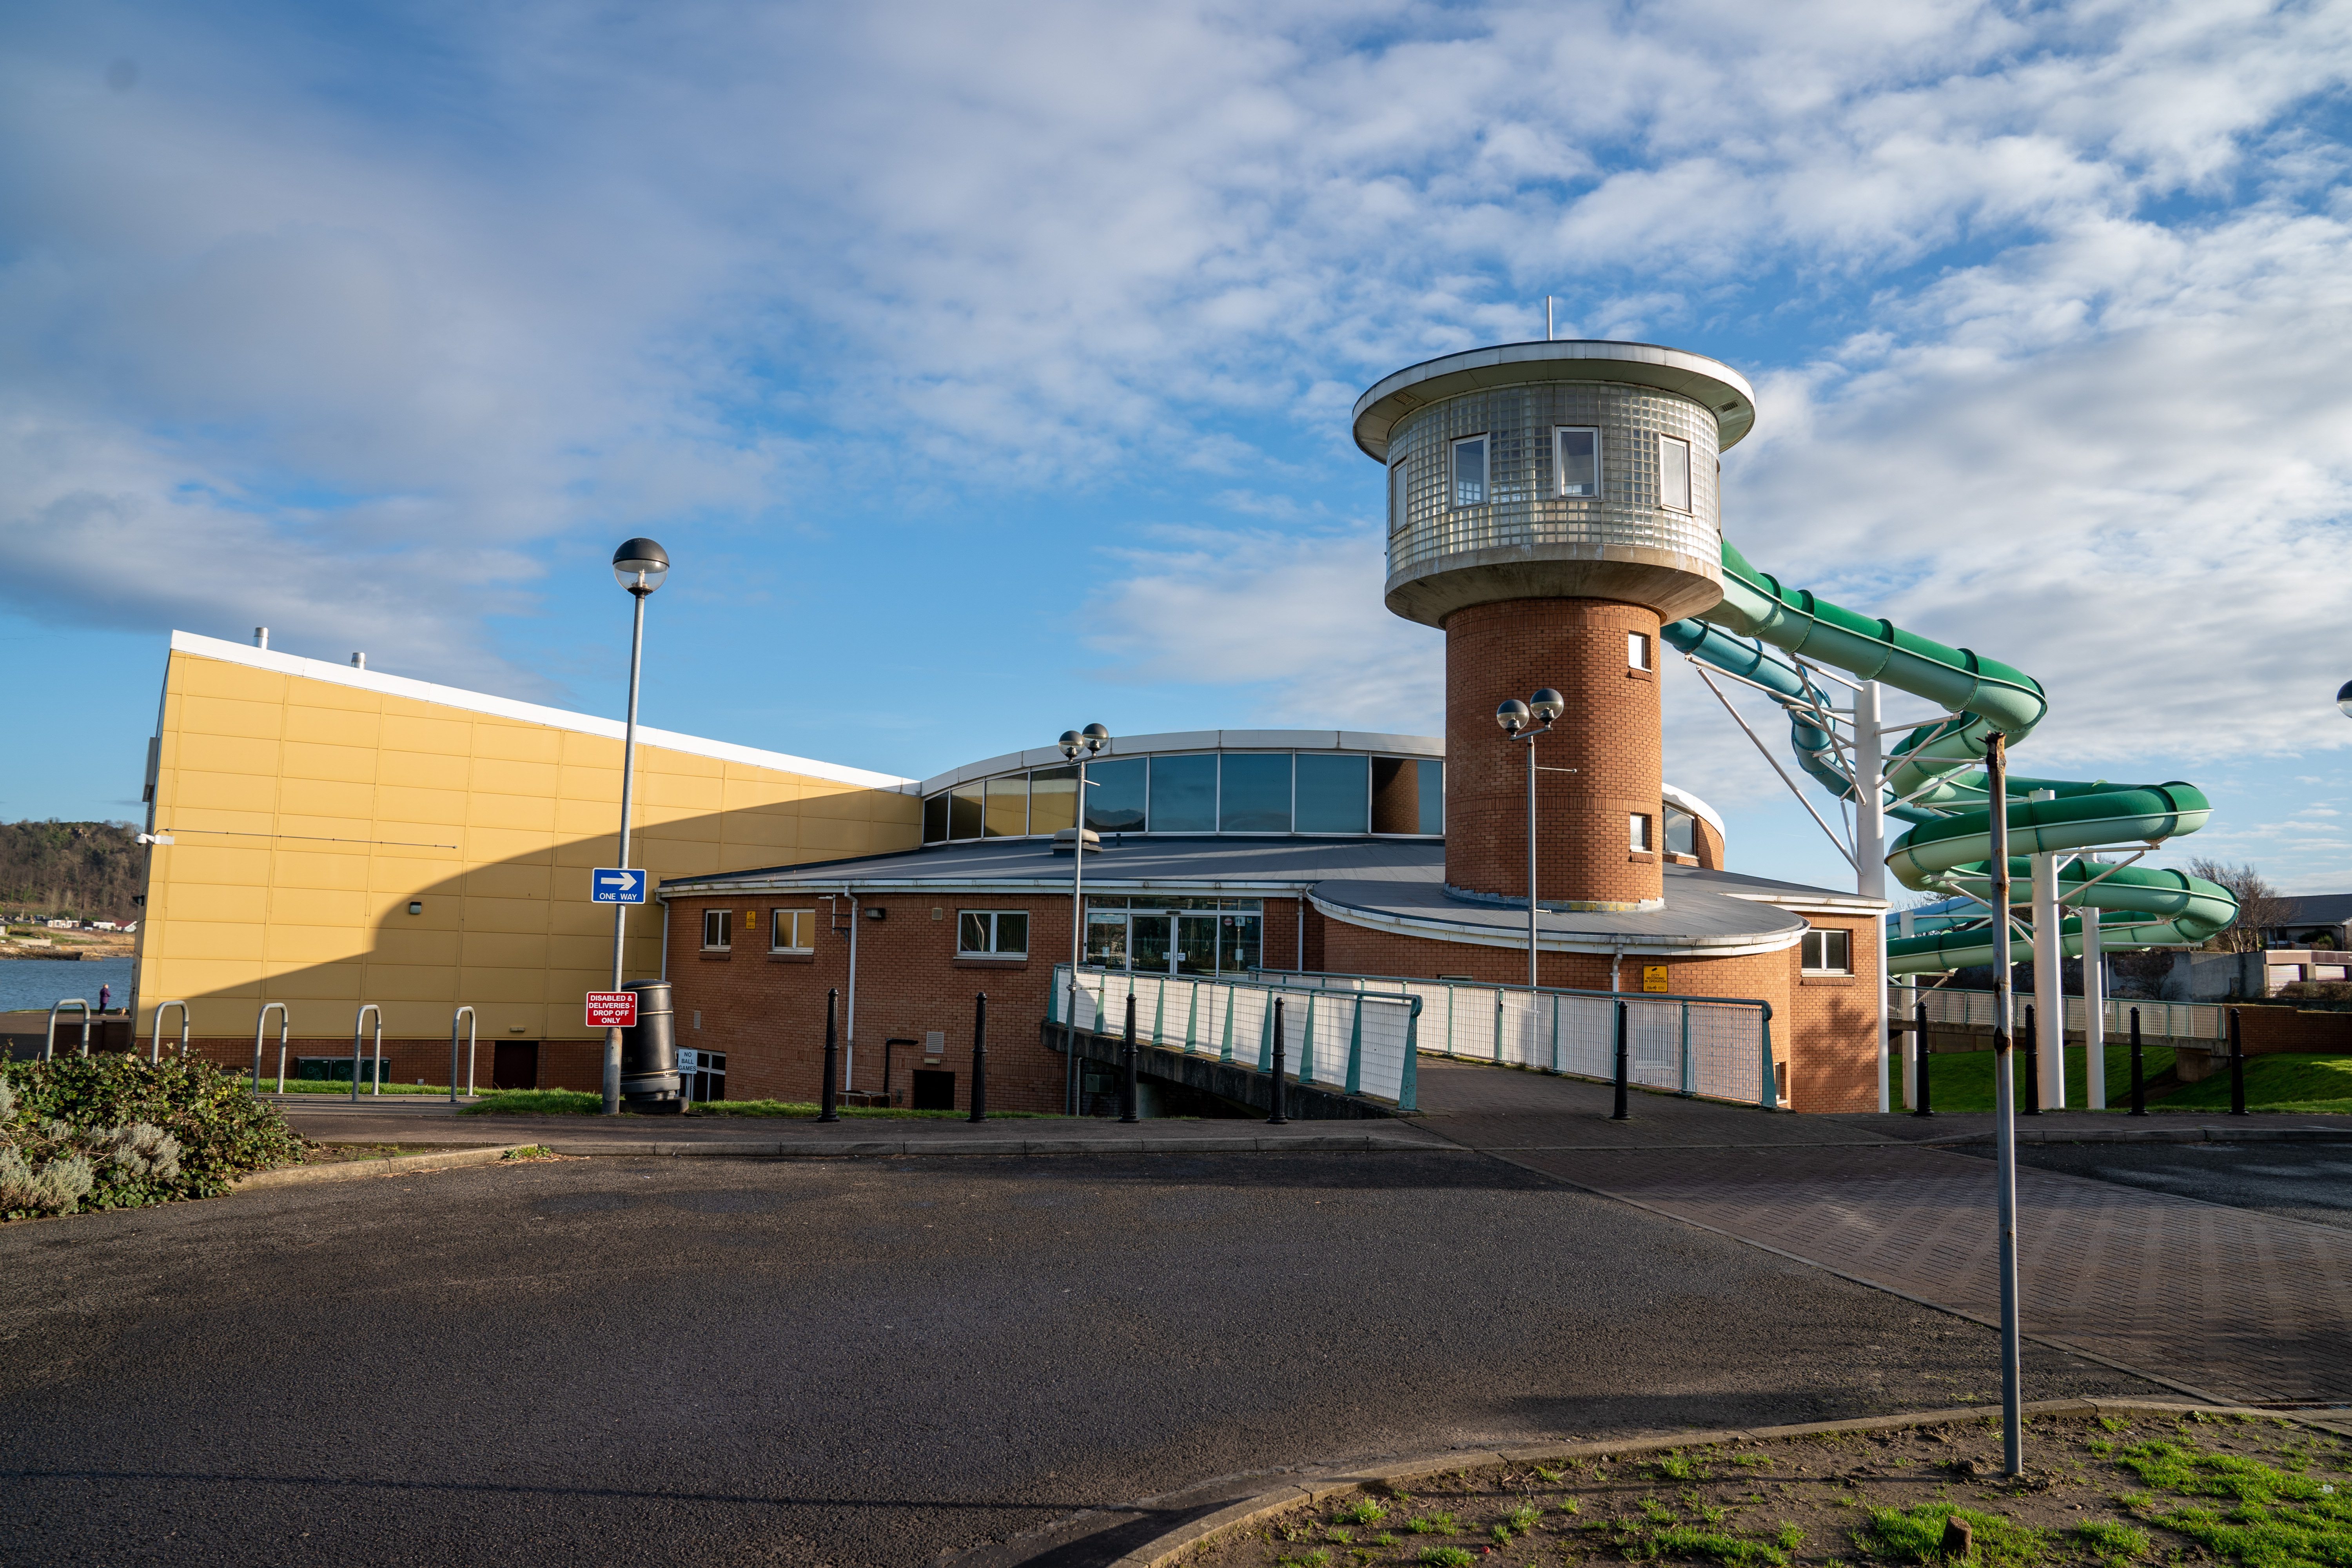 The Beacon Leisure Centre in Burntisland, which is run by Fife Sports and Leisure Trust.